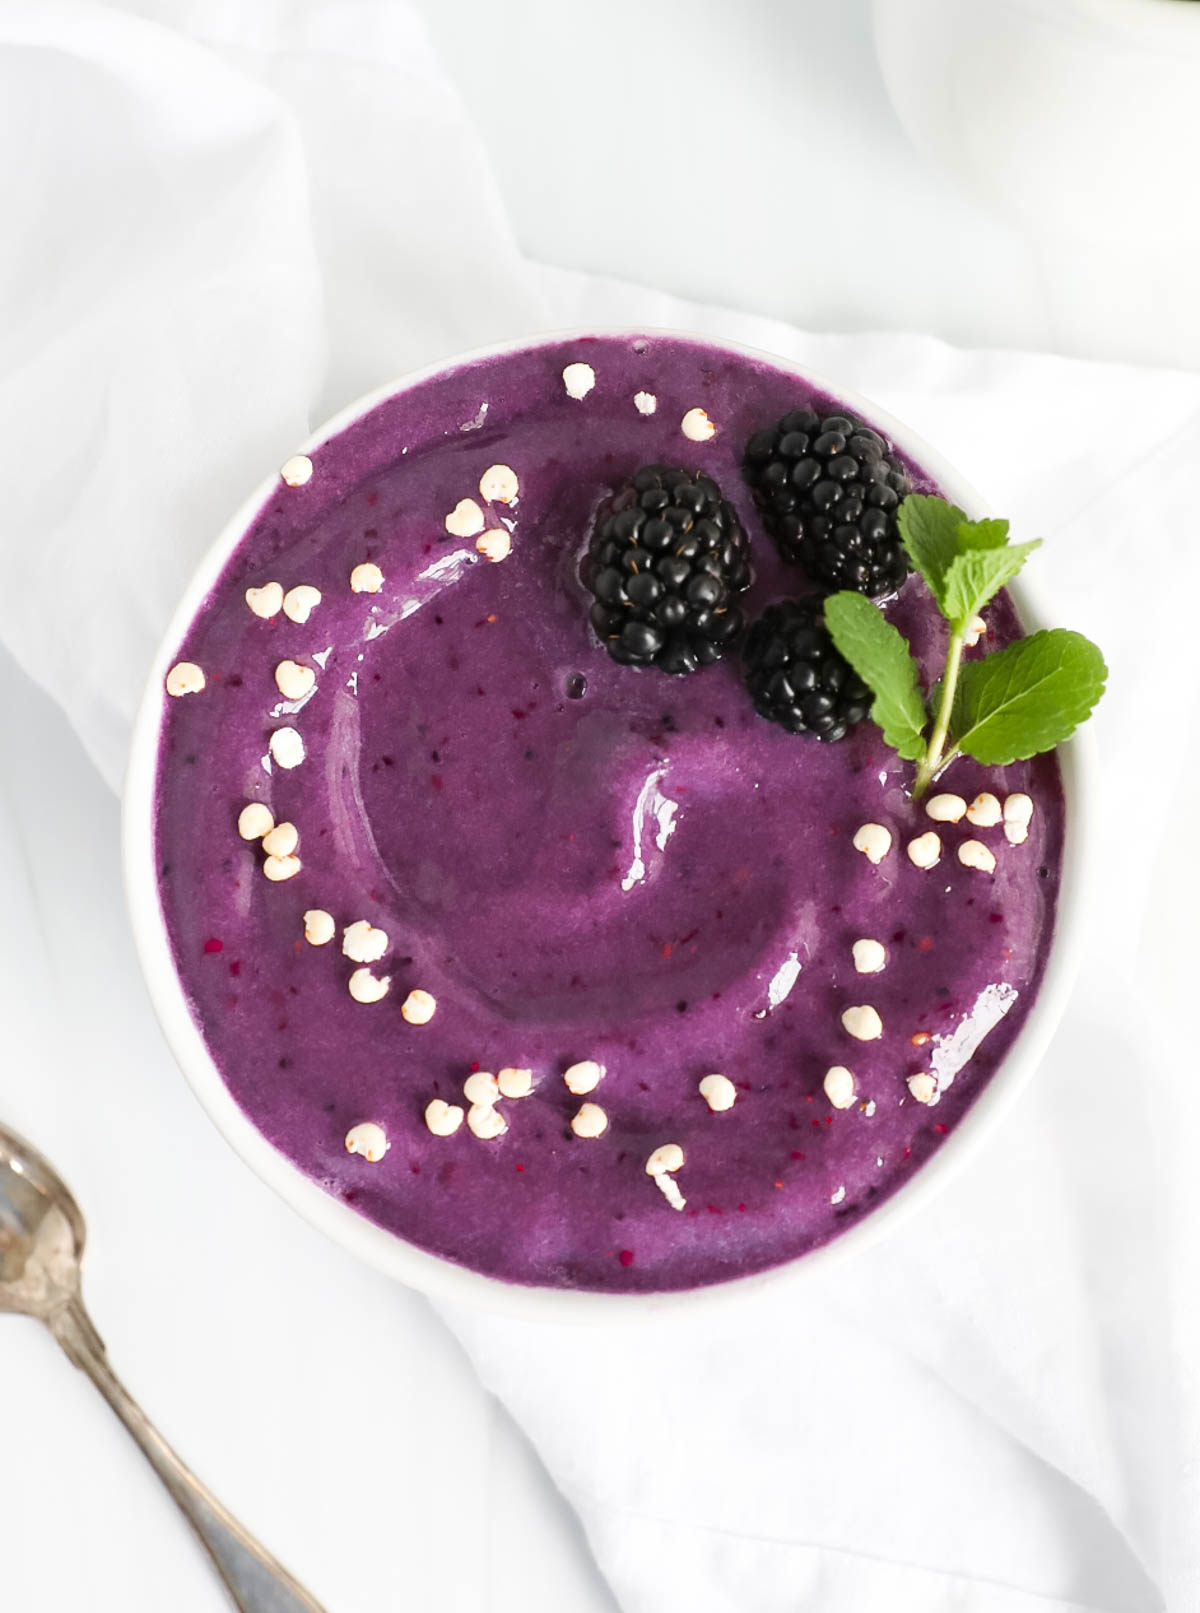 A purple smoothie in a white bowl garnished with three blackberries, fresh mint, and white puffed cereal.